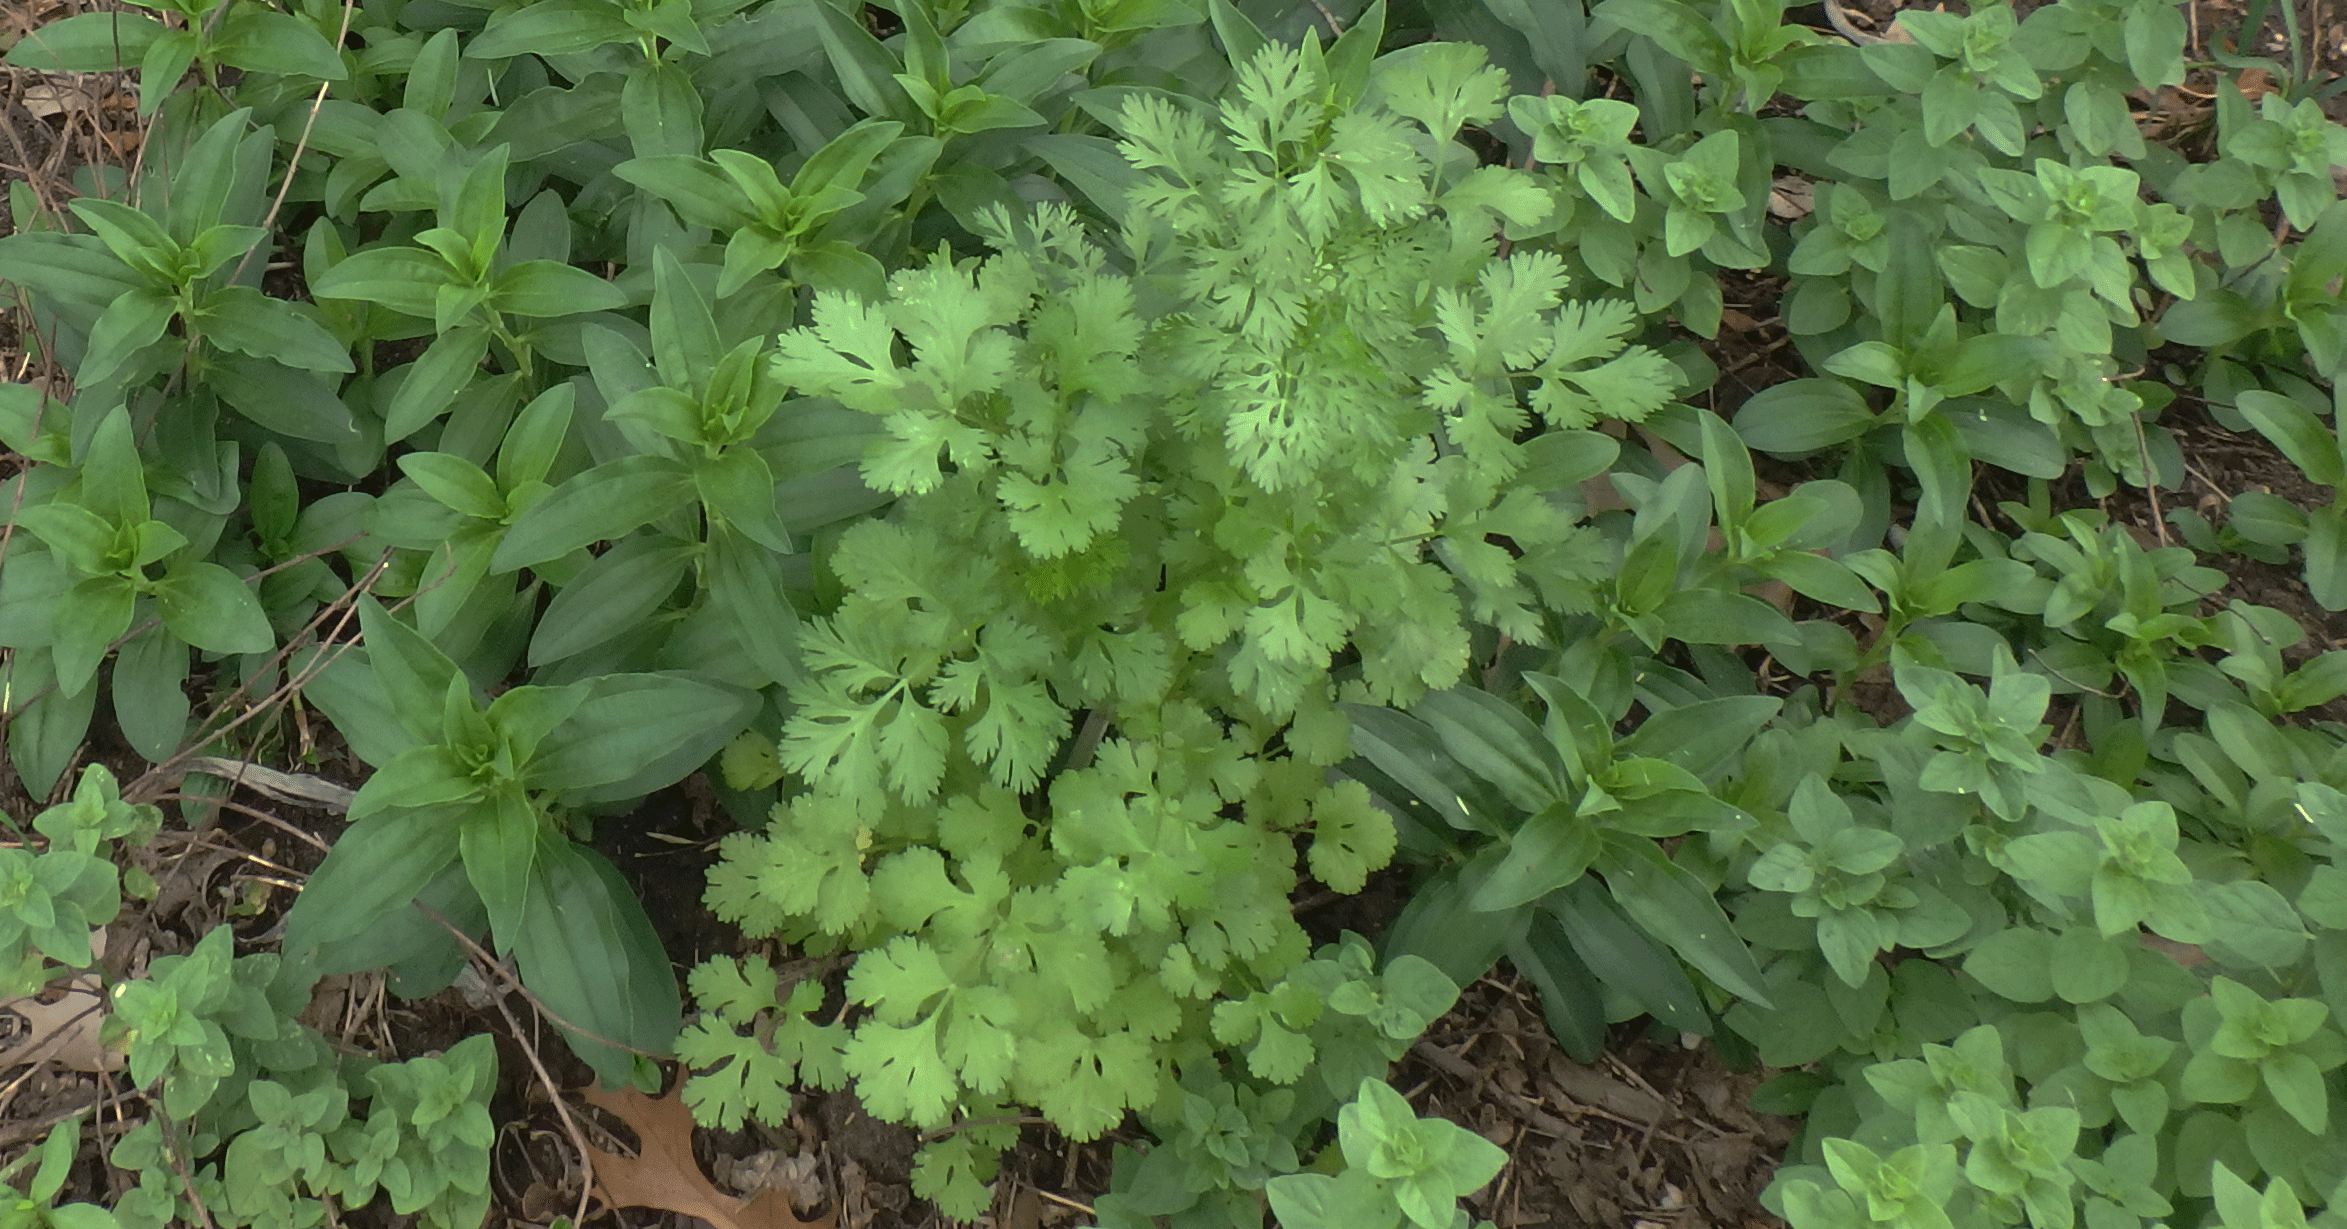 Cilantro (center of photo) can only be grown in Texas during the cooler months of the year. This young plant is surrounded by soapwort with Greek oregano around the edges.